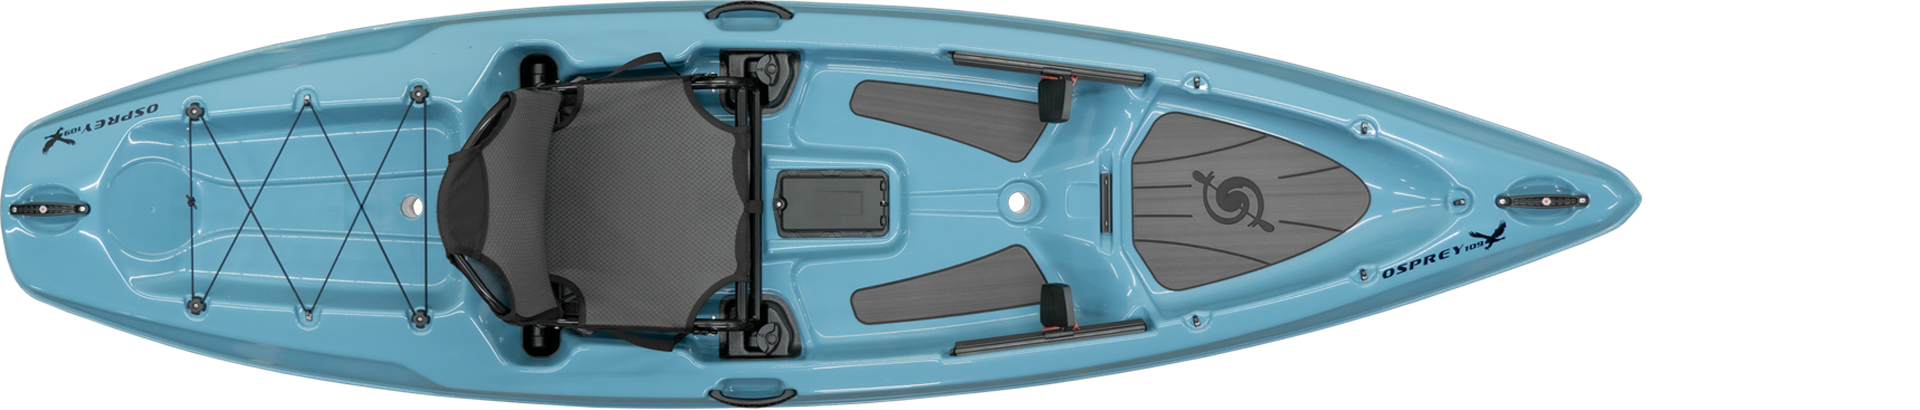 A Top View of The Hurricane Osprey 109